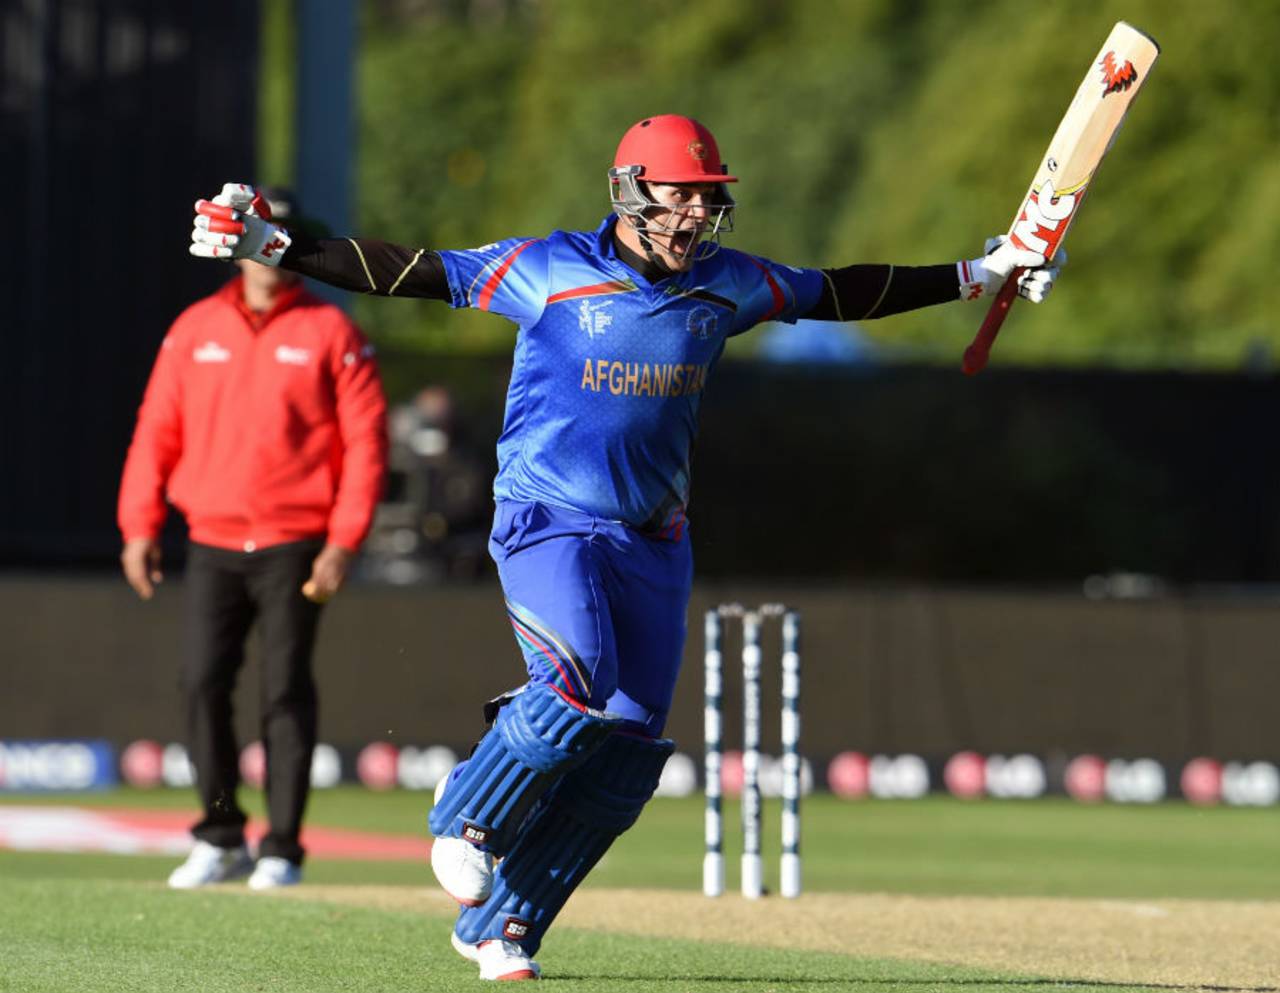 Afghanistan's win was good for cricket in general. If only the sport's bosses woke up to their potential&nbsp;&nbsp;&bull;&nbsp;&nbsp;AFP